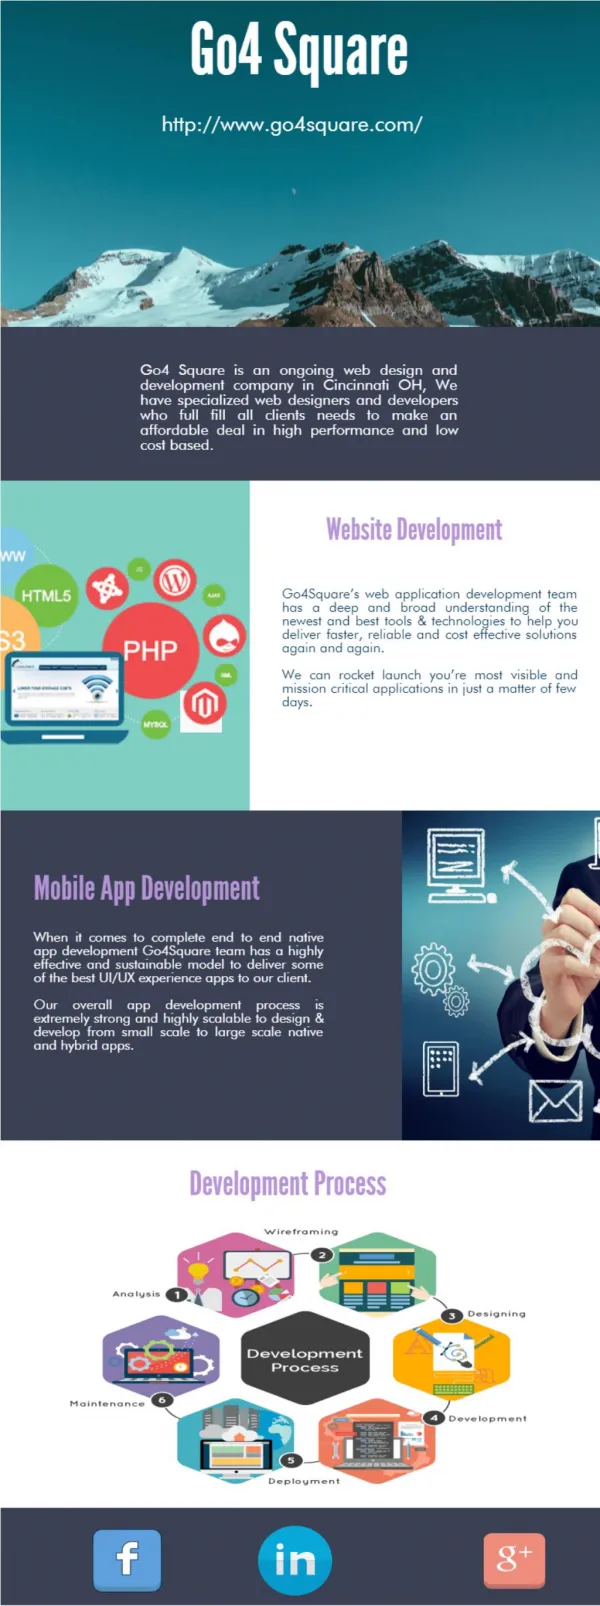 Ongoing Web Design and Development